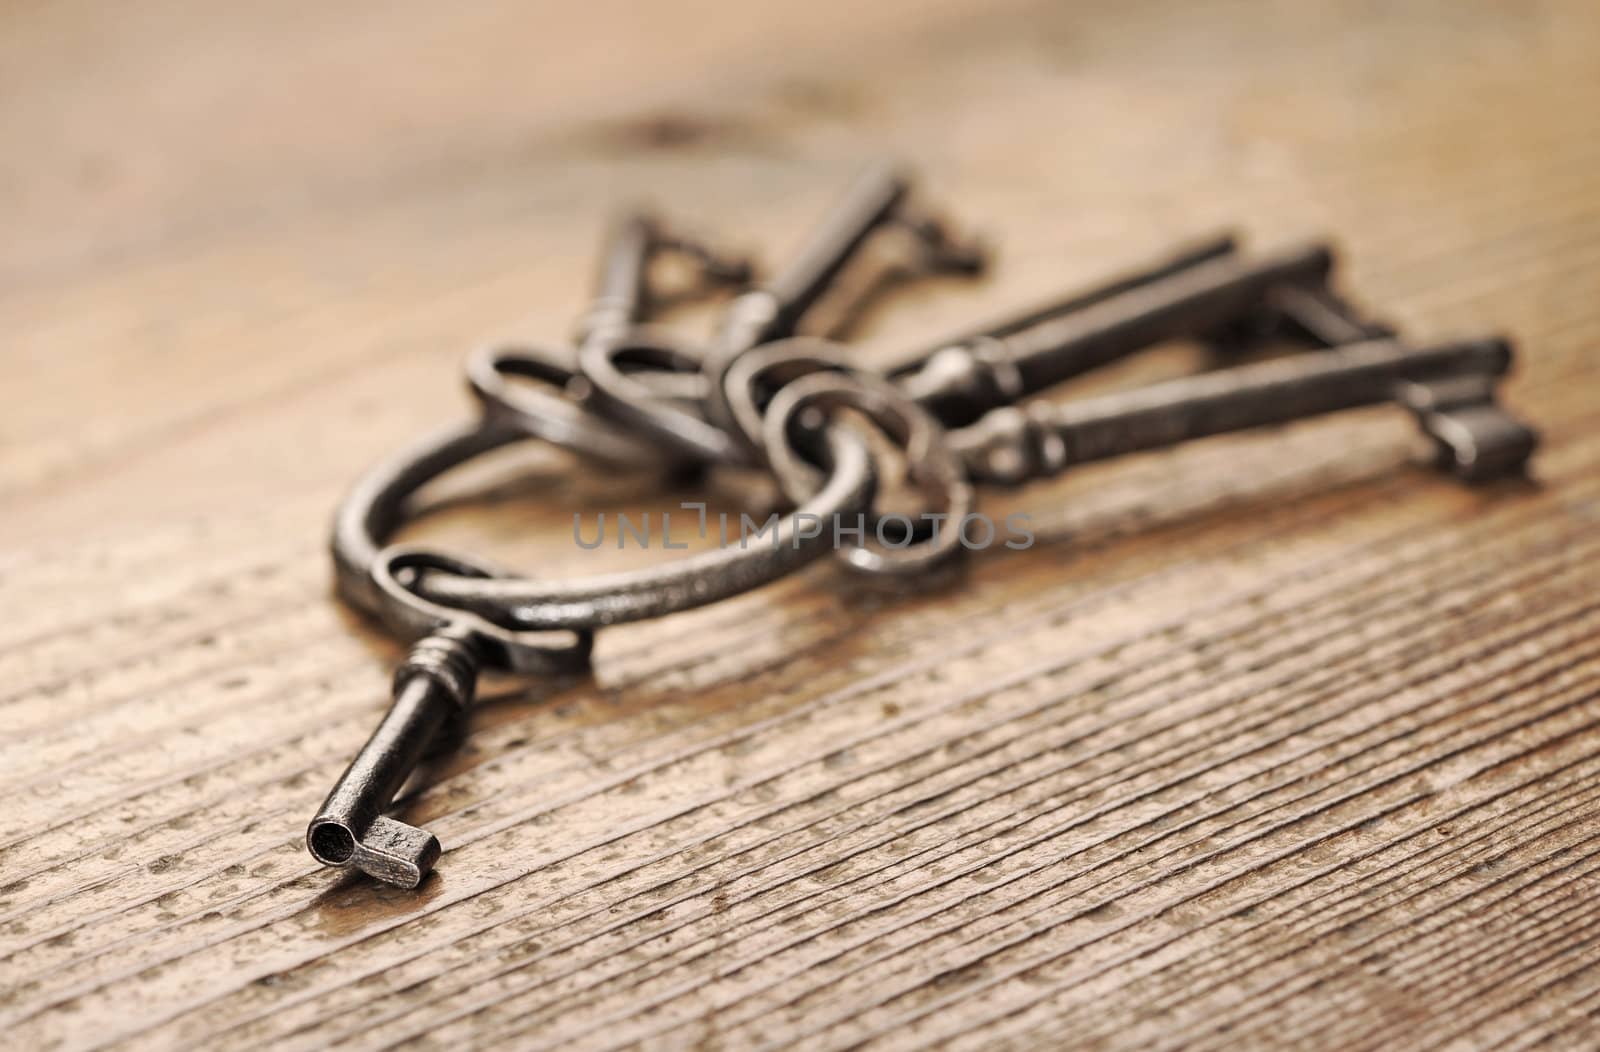 old keys on a wooden table, close-up